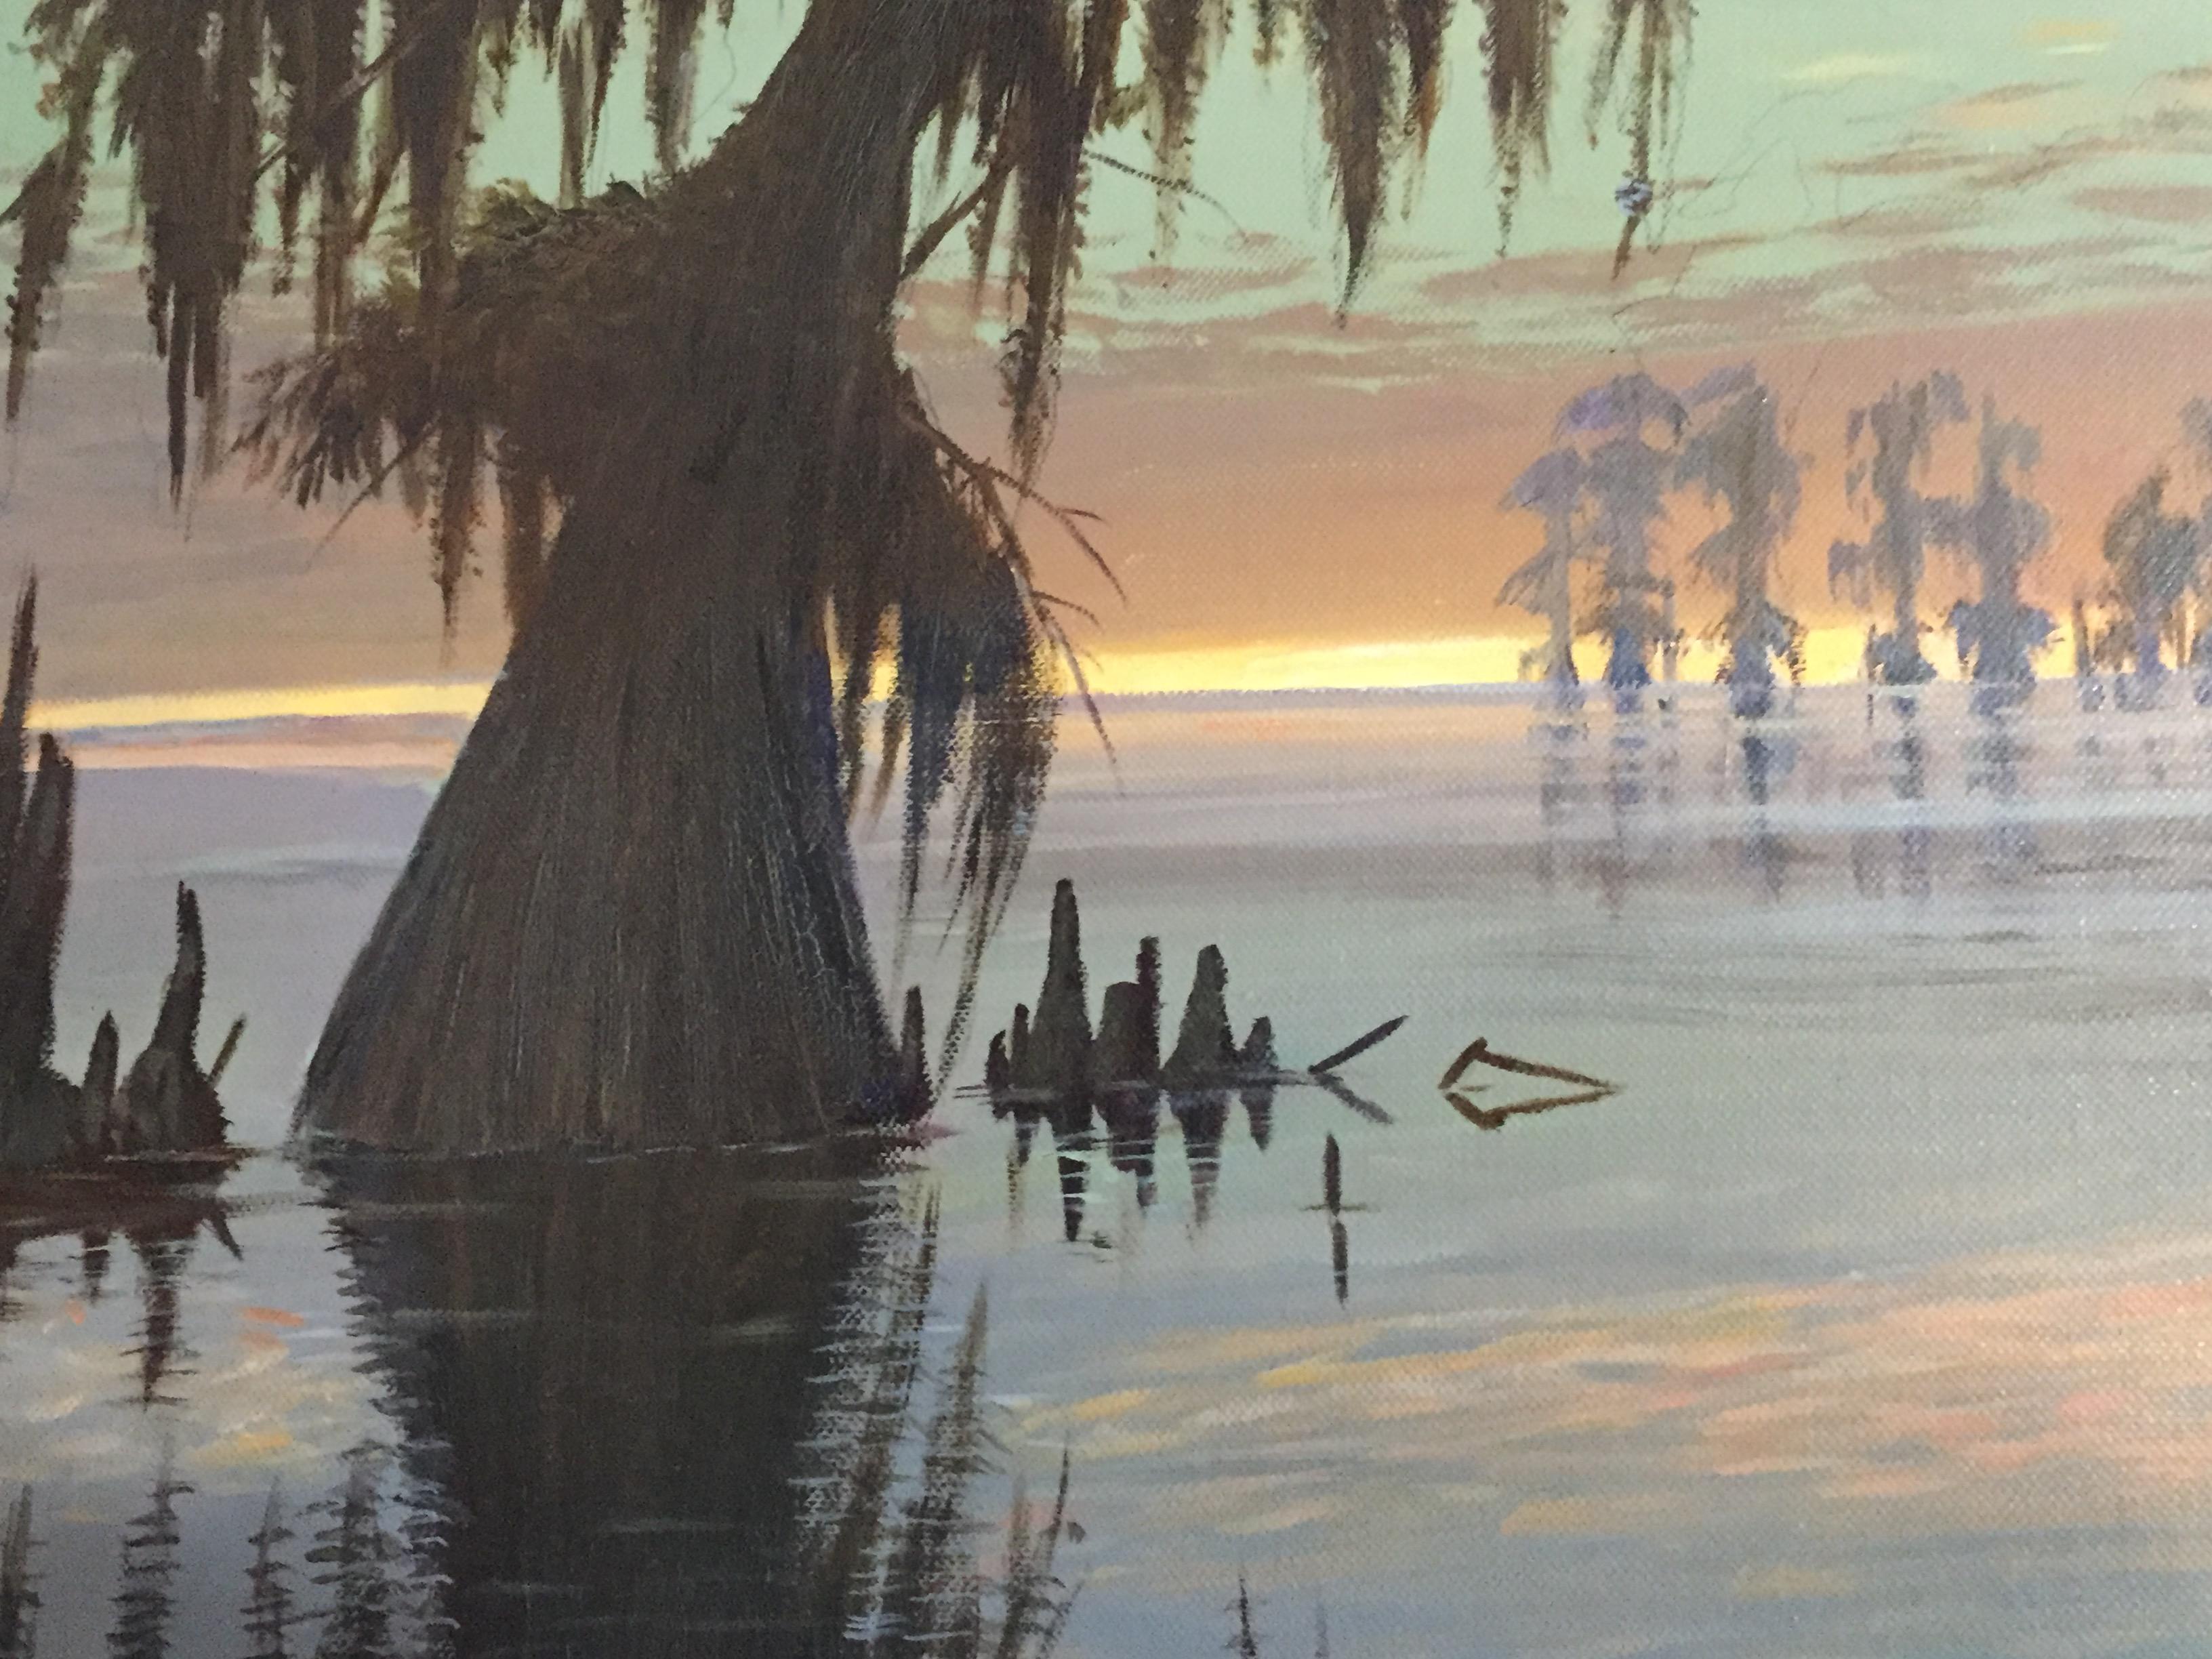 Murrell Butler
Bayou Sunset, 2009
Oil on Canvas
30″ x 40″
$4800
An evocative Louisiana bayou at sunset by noted Louisiana native artist Murrell Butler. Hard to find originals by this painter -- almost all of what you see are prints. Framed and ready